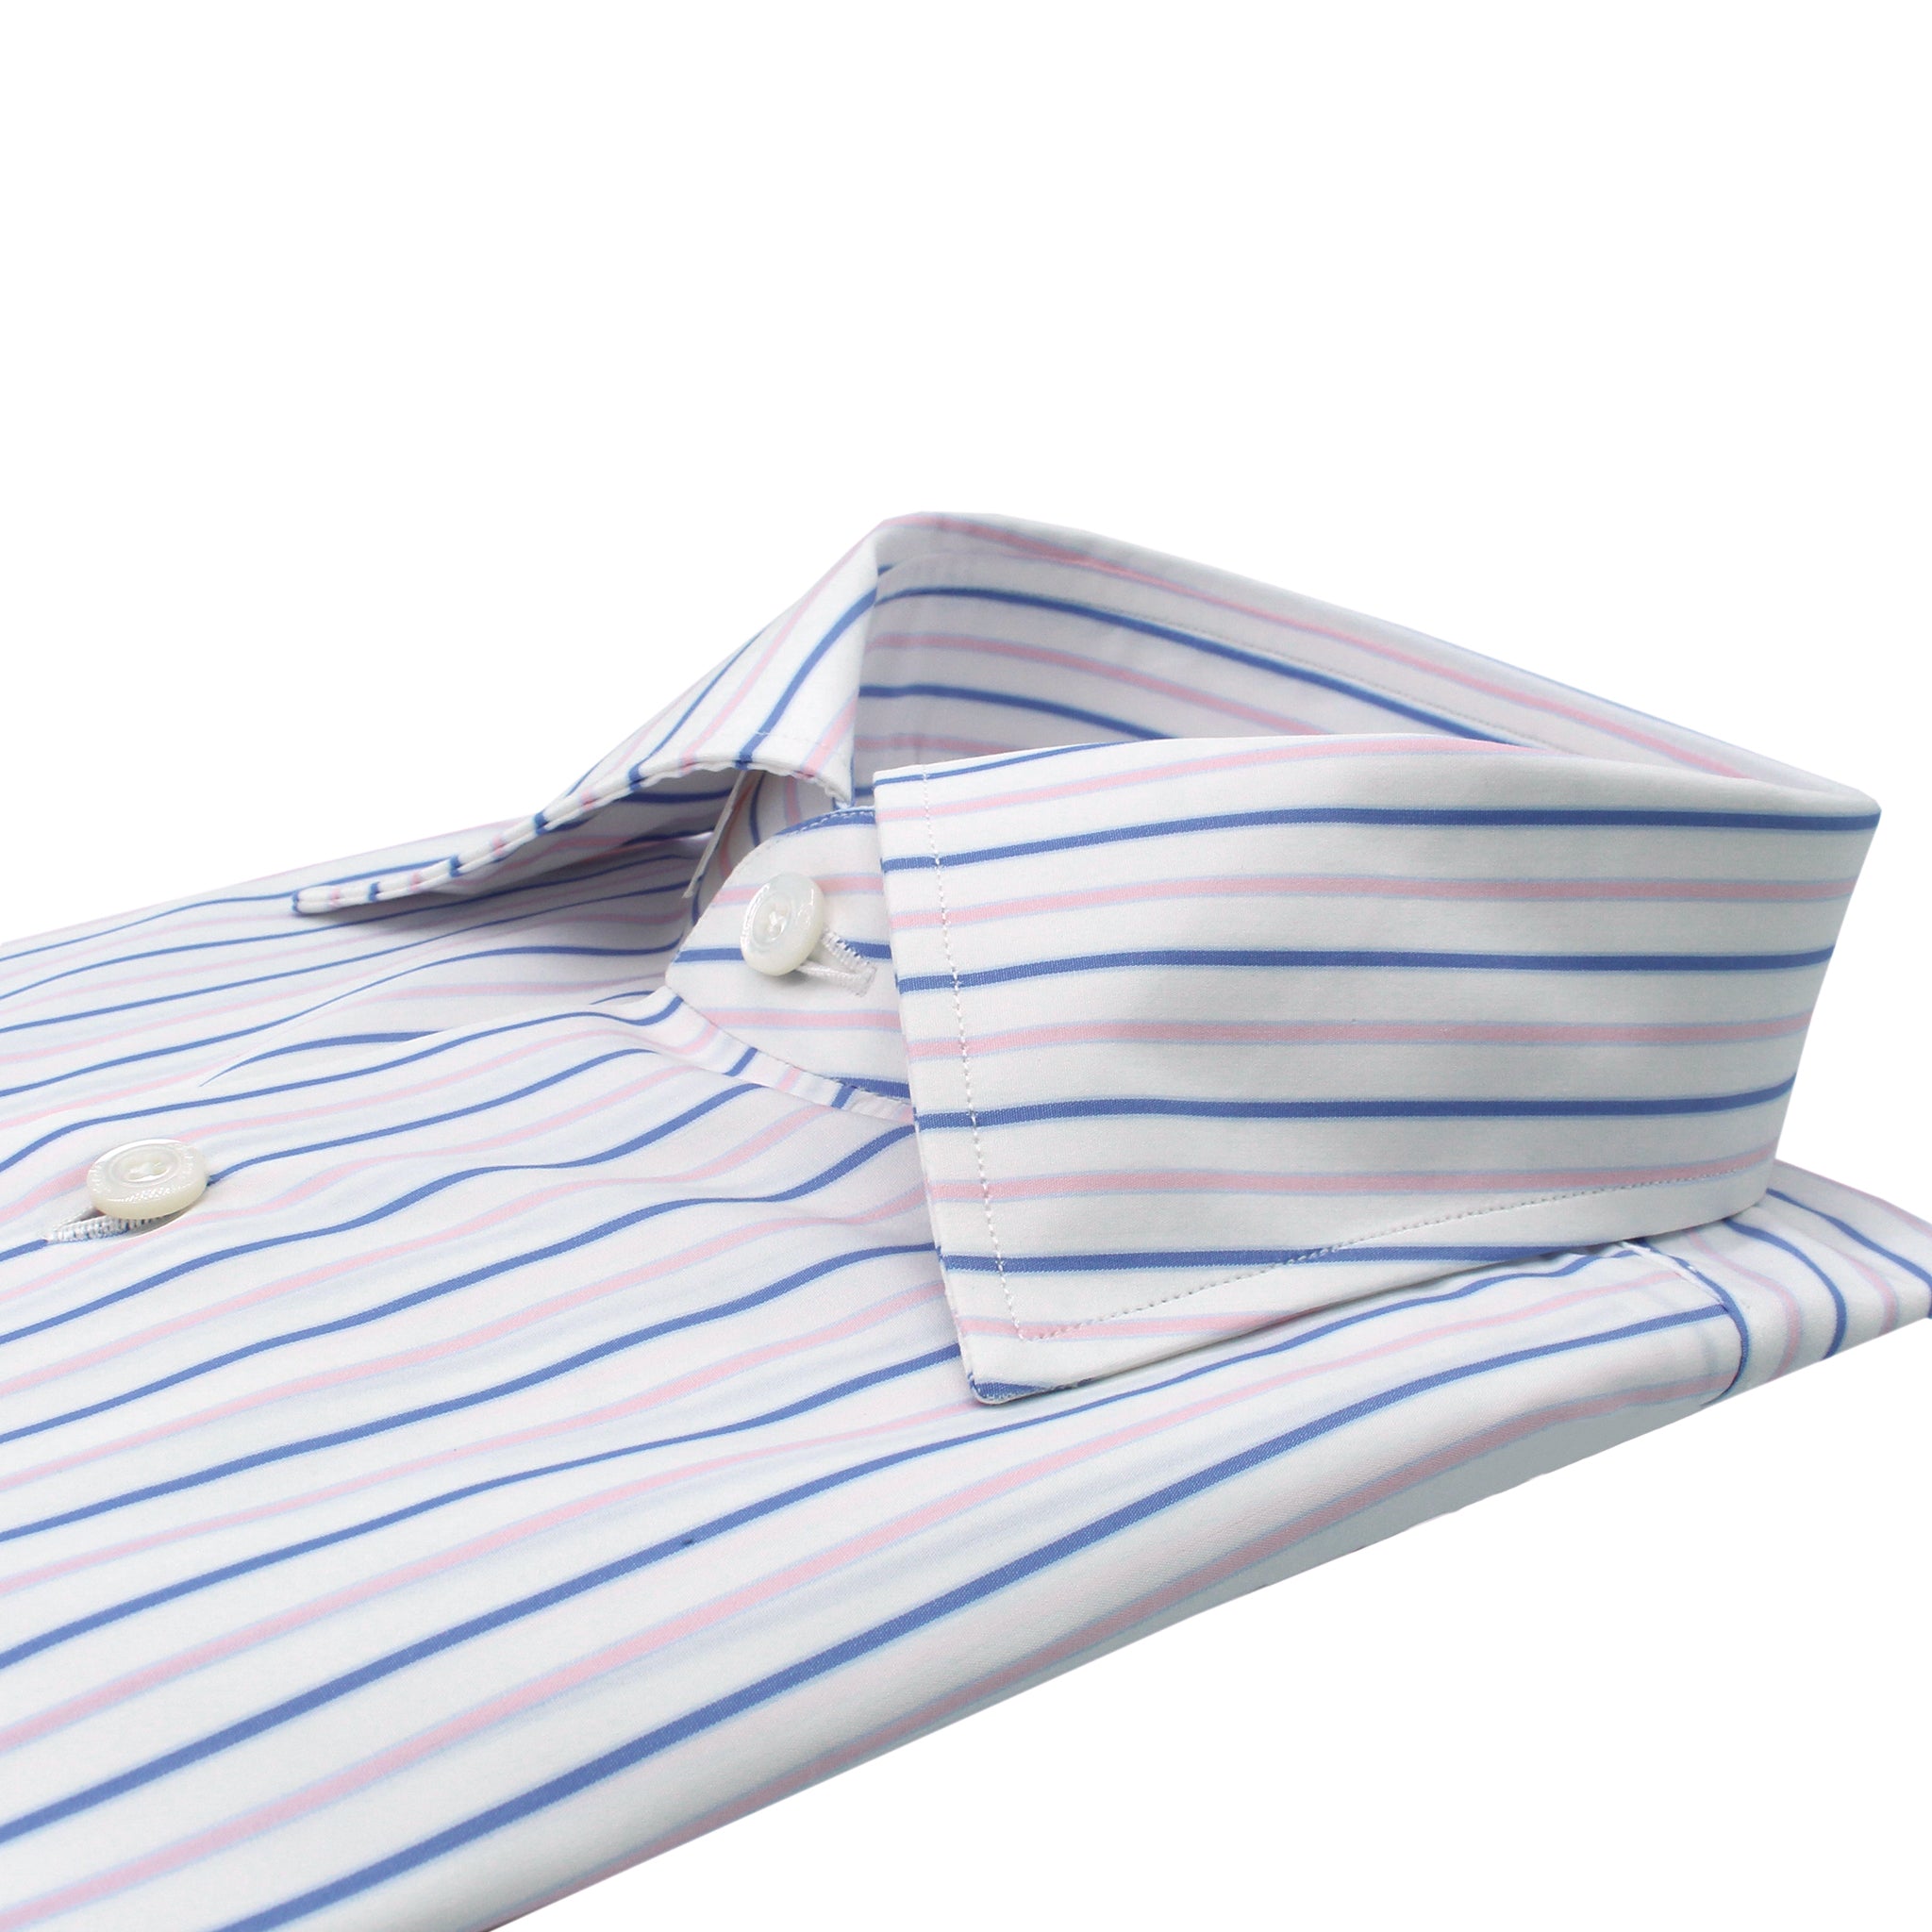 Classic Naples 170 a due white shirt with blue and red stripes